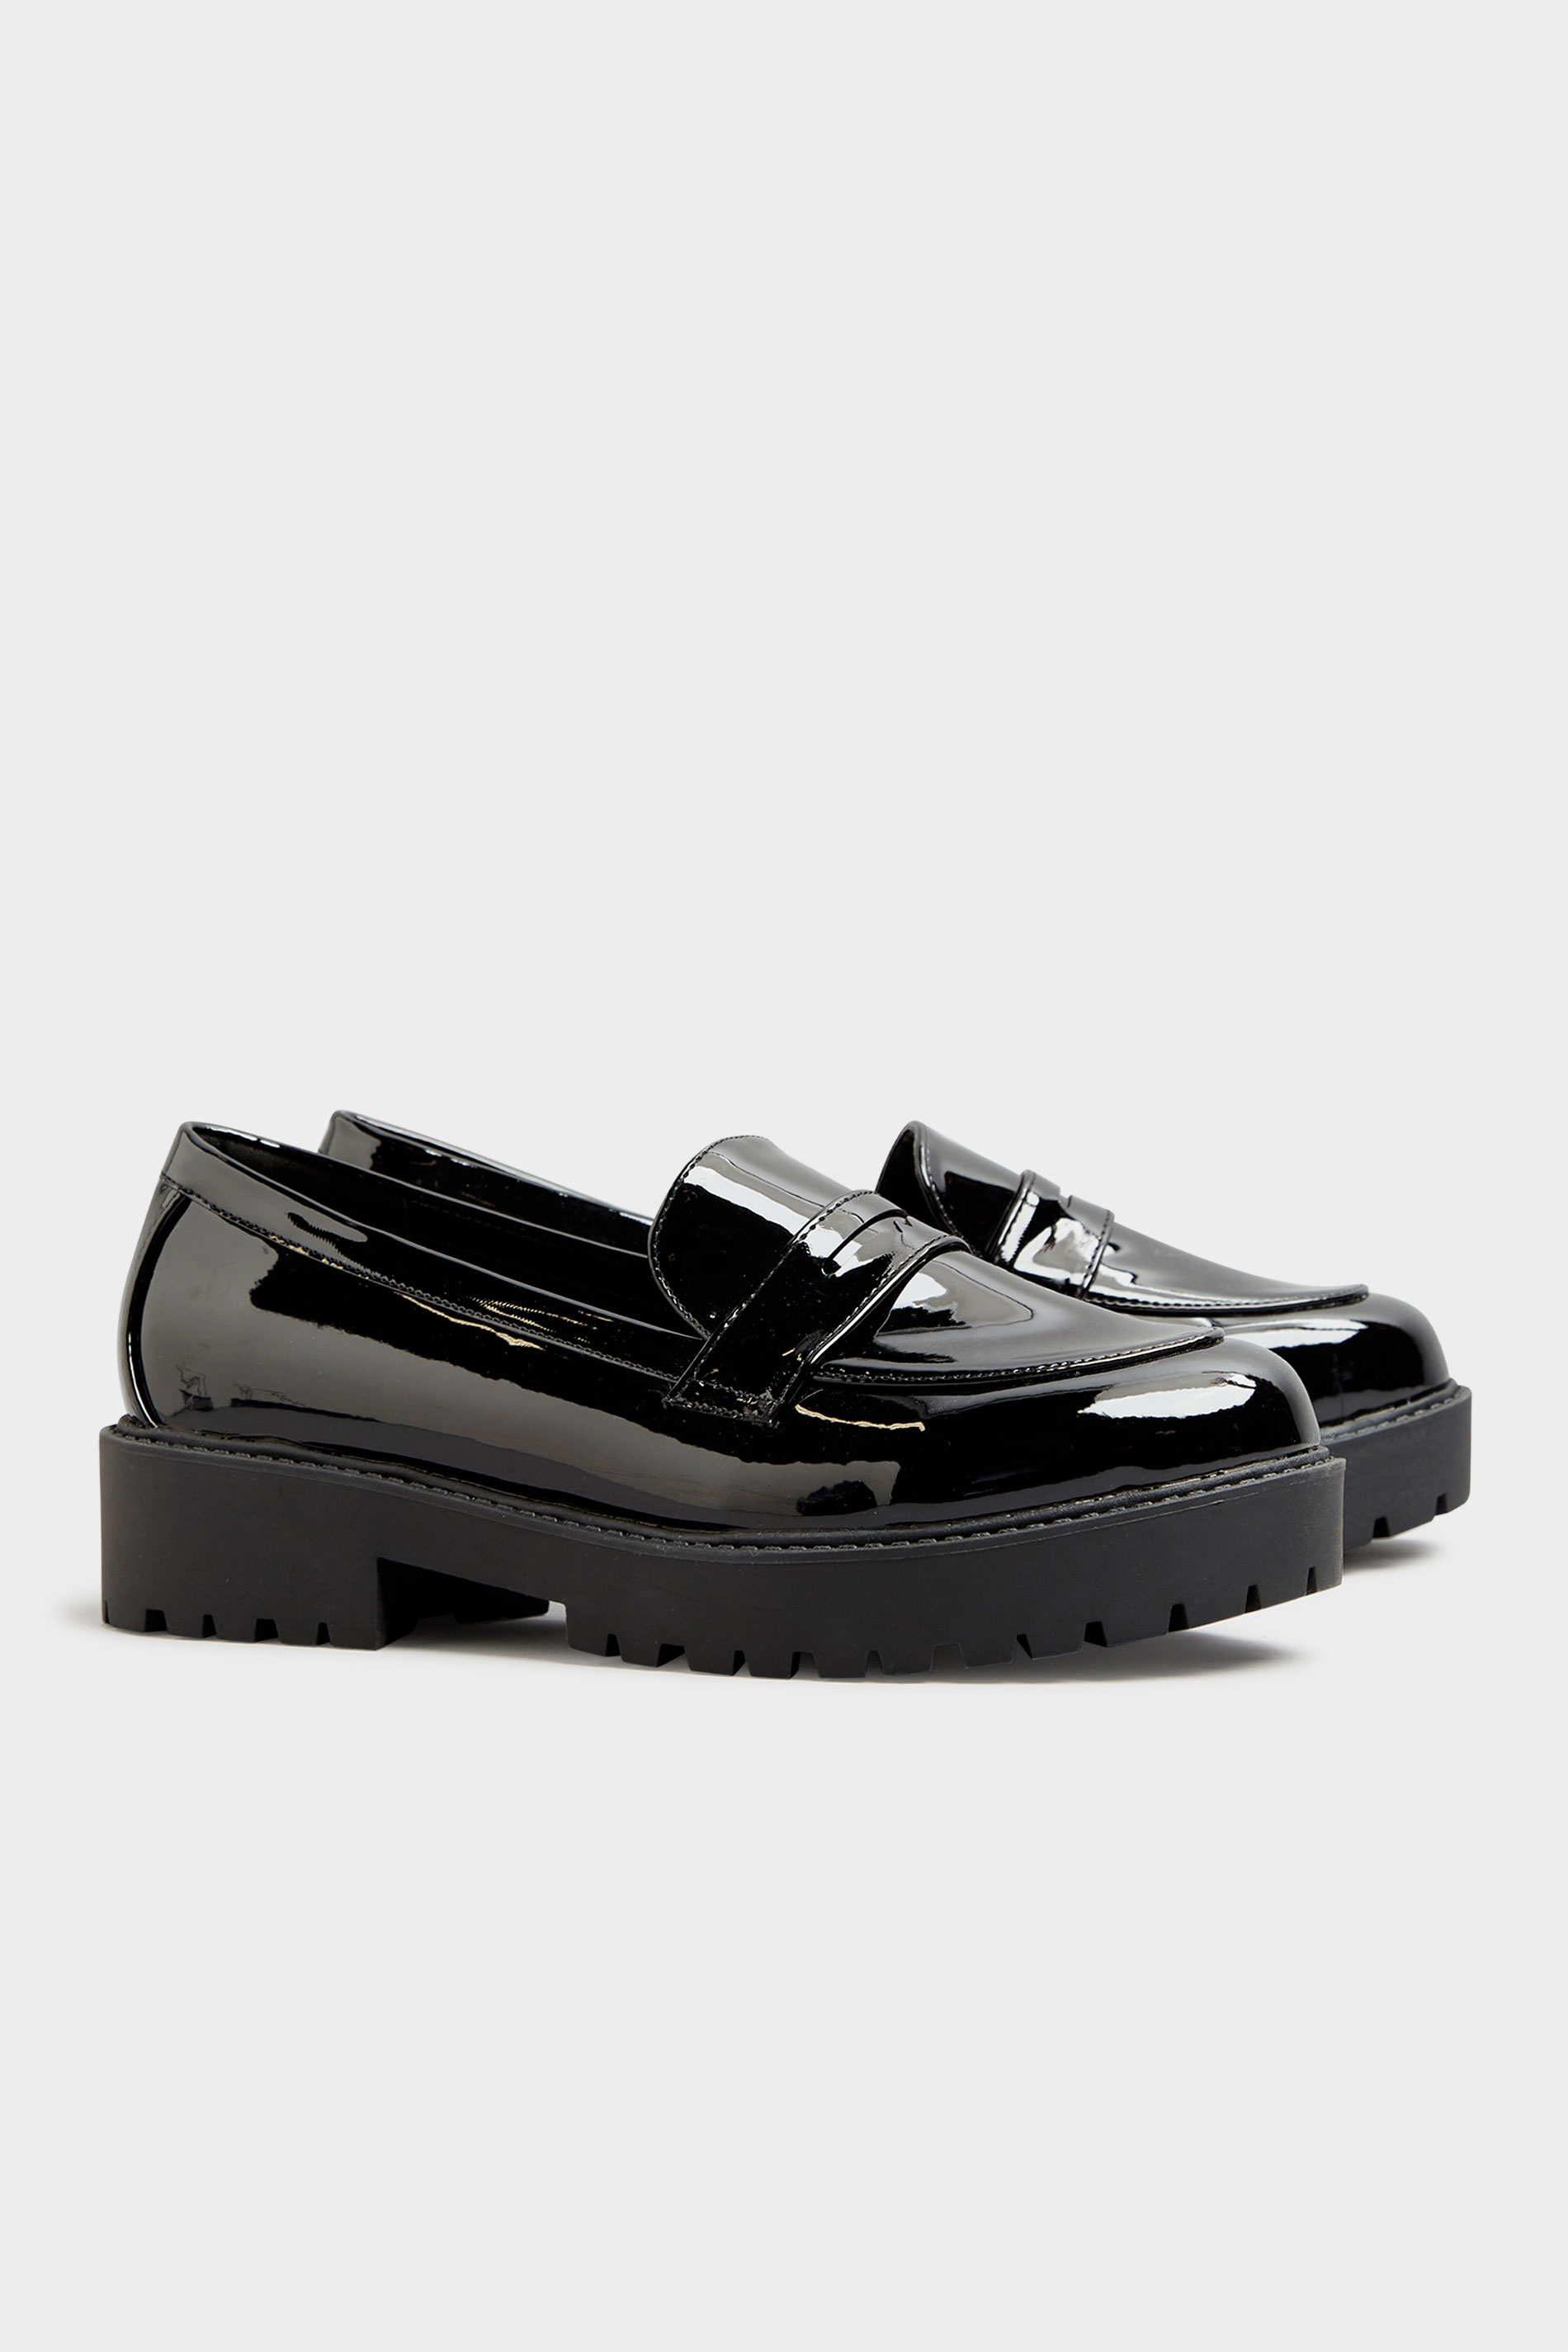 Black Patent Chunky Loafers In Extra Wide Fit_C.jpg